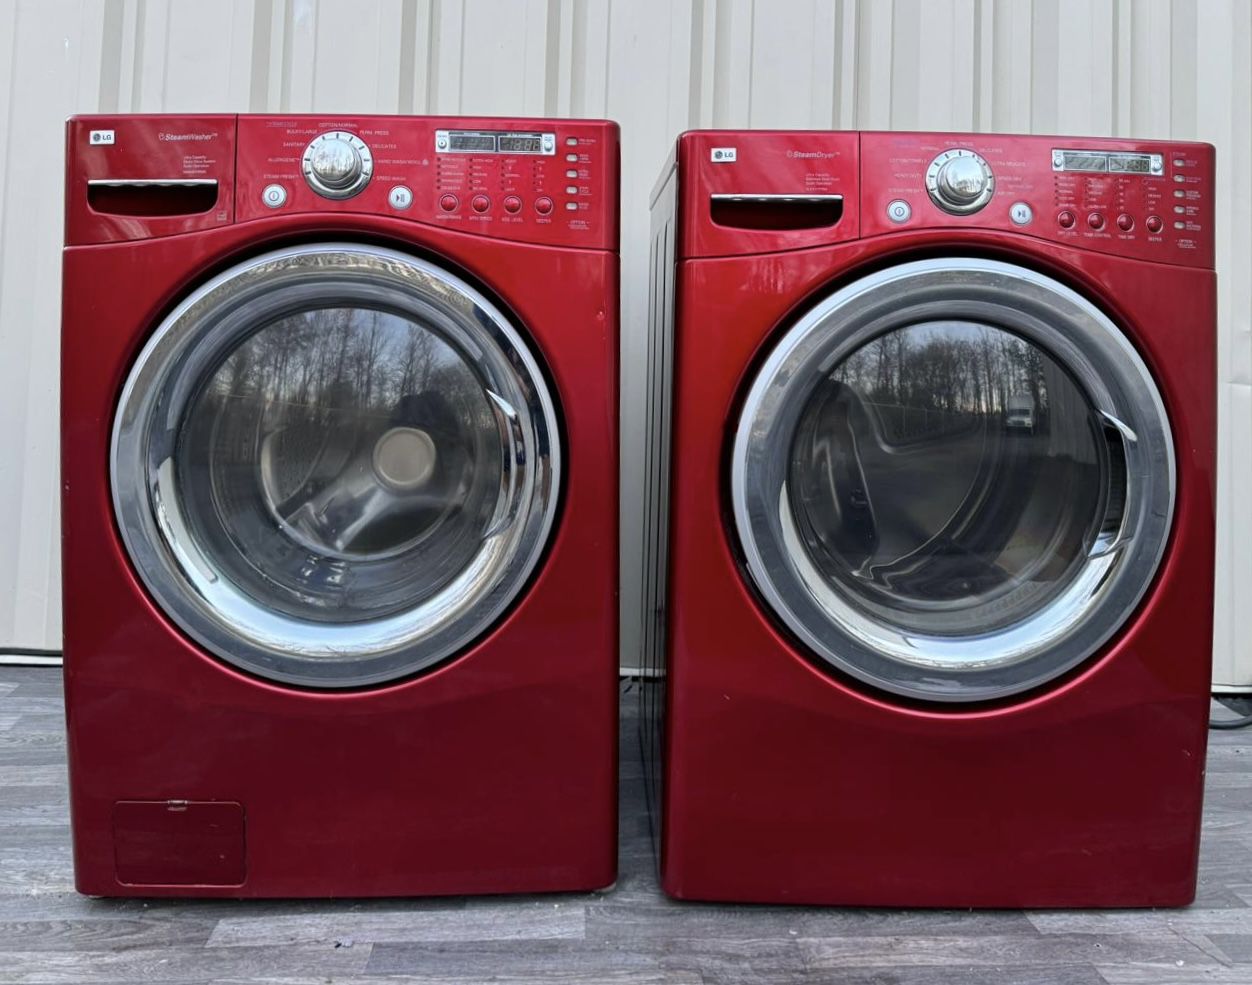 Washer And Dryer  